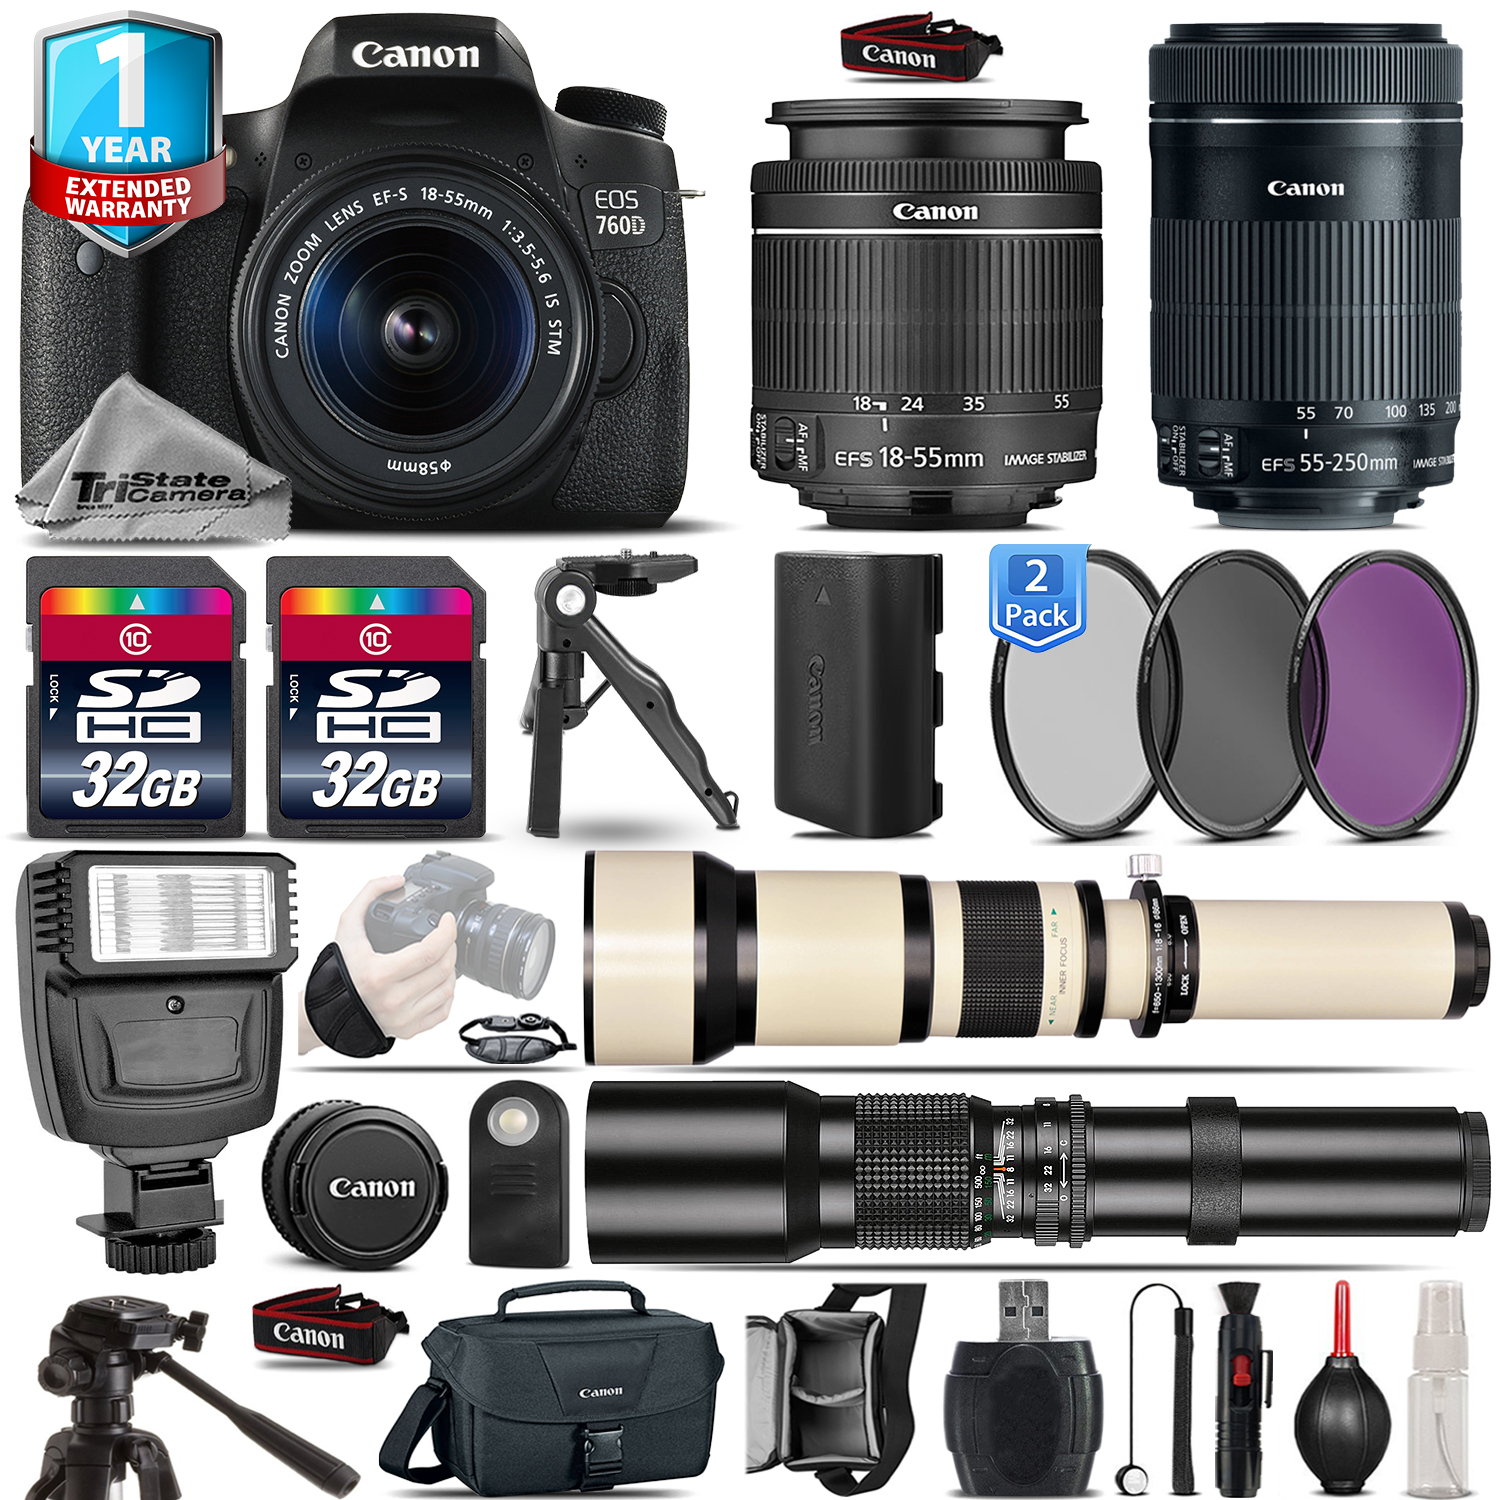 EOS Rebel 760D Camera + 18-55mm IS + 55-200mm IS + 1yr Warranty - 64GB Kit *FREE SHIPPING*